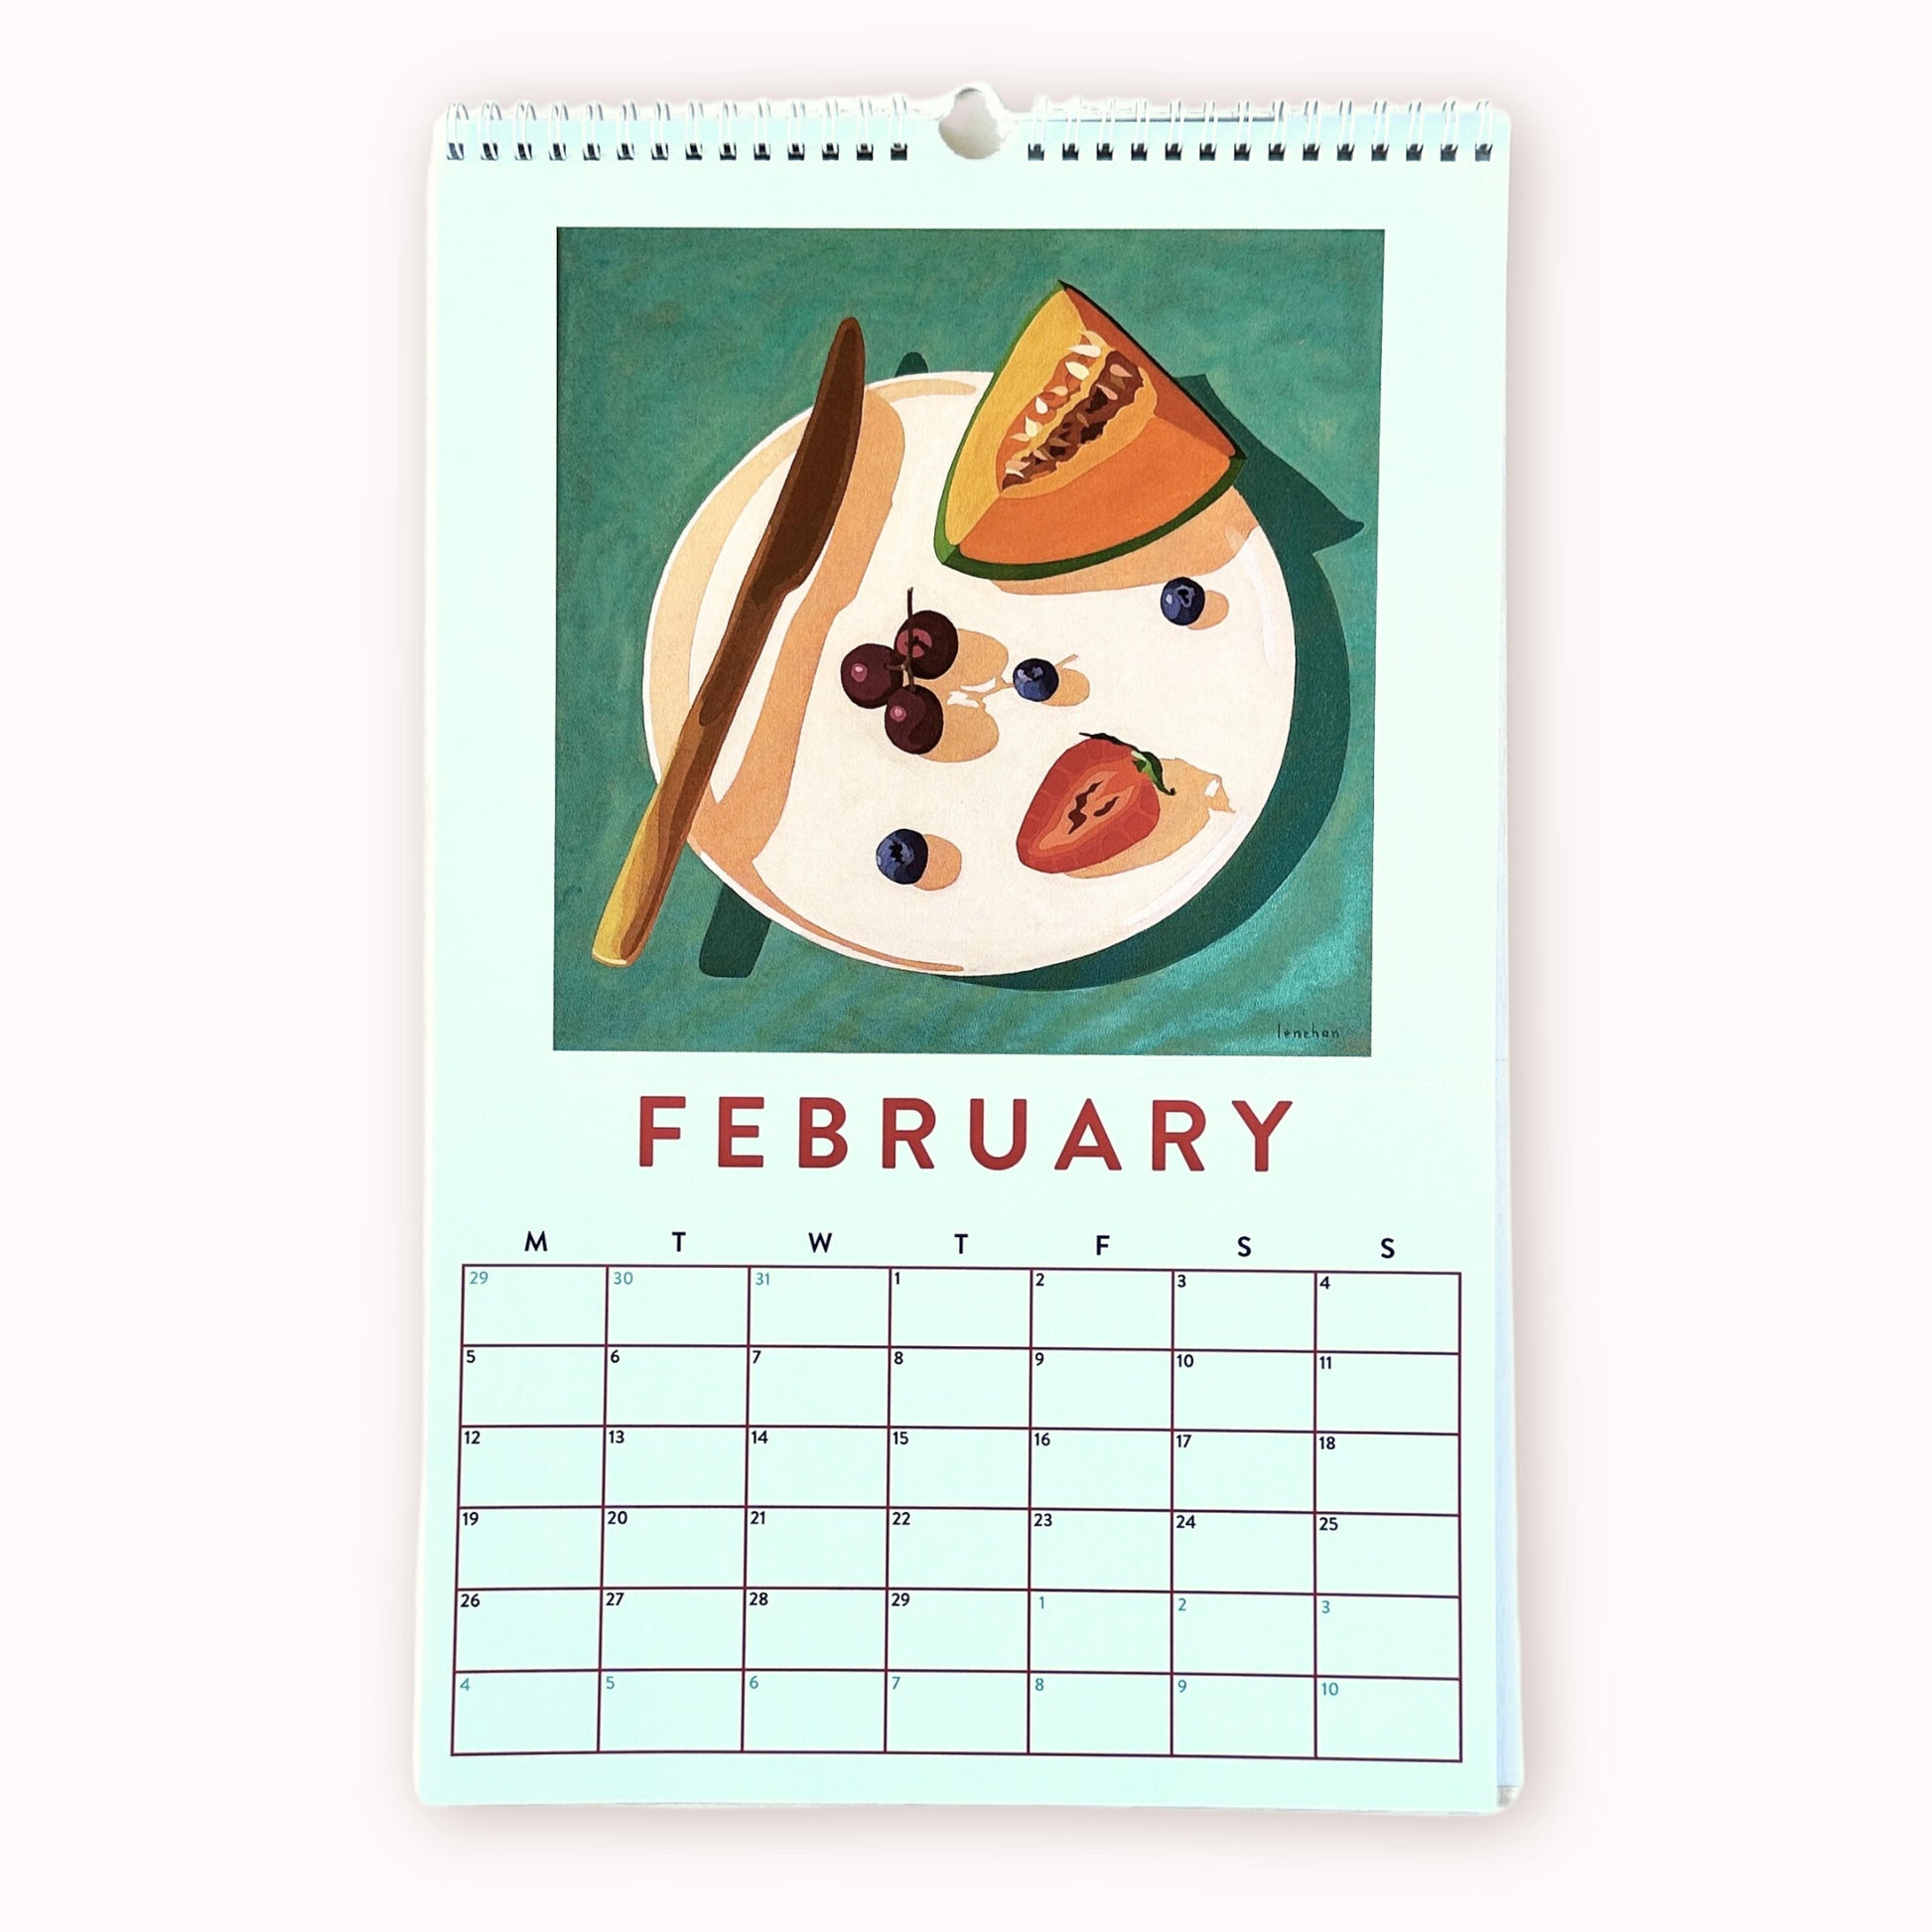 2024 art wall calendar for the month of February in A3 size featuring a still life oil painting of fruits such as orange rock melon, grapes, blueberries and strawberries, with a knife on a cream plate sitting on a teal background with strong shadows